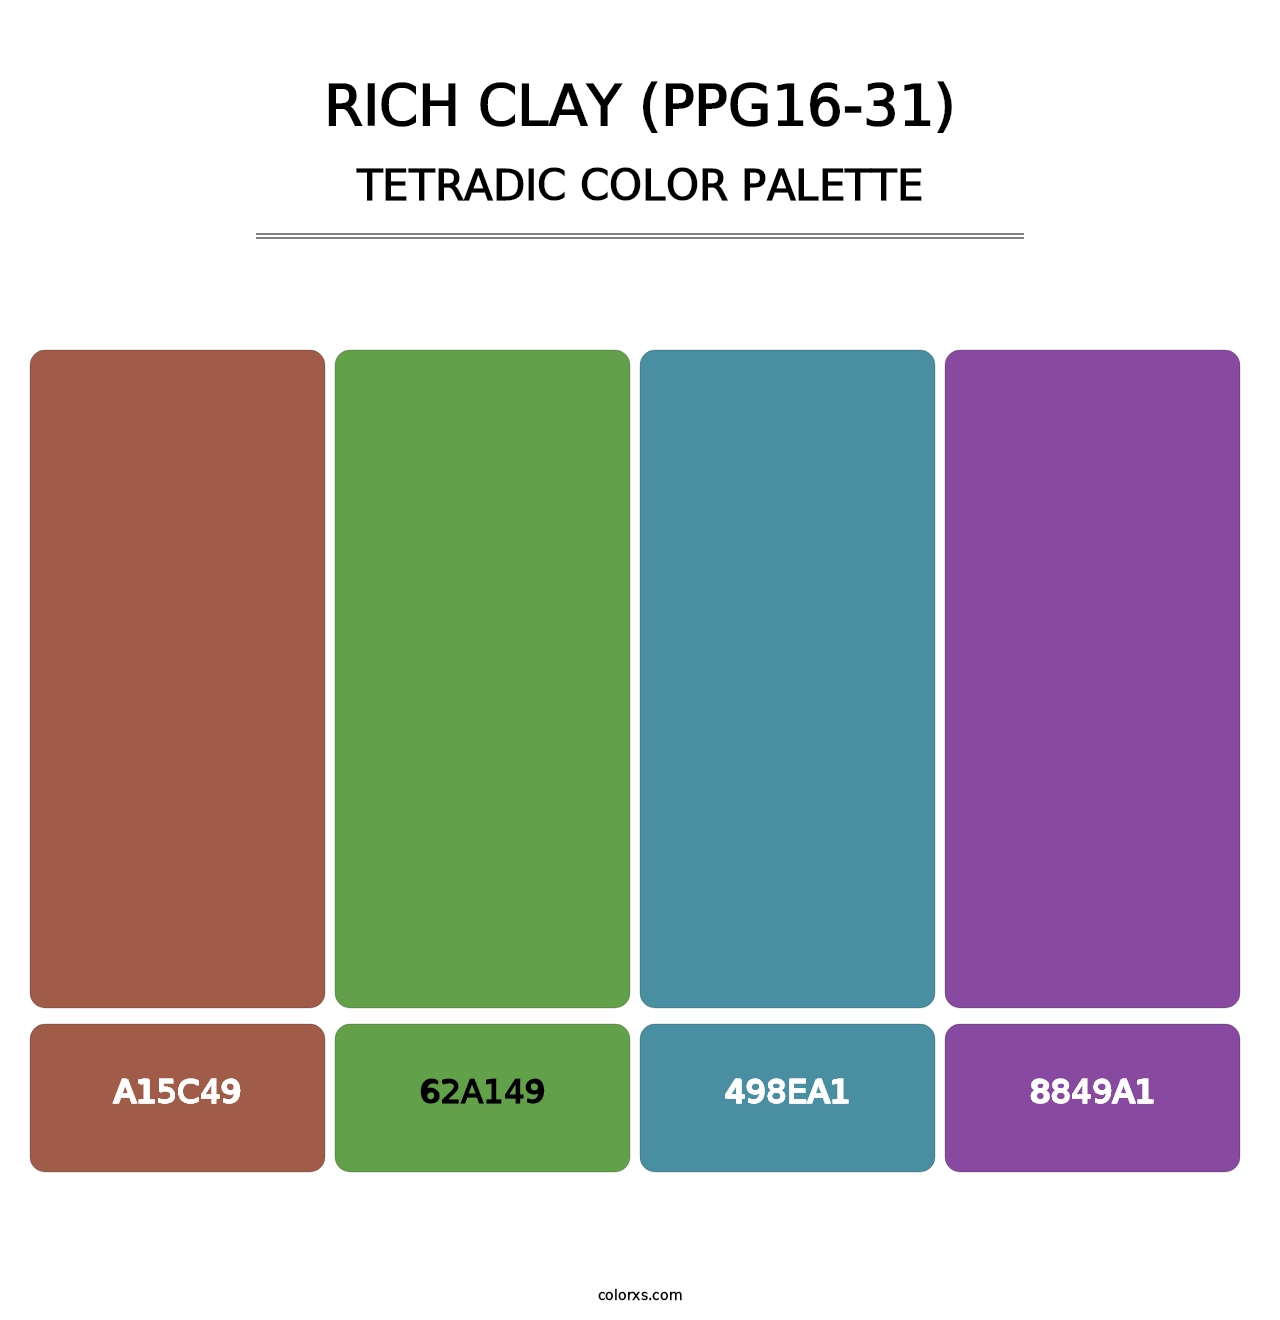 Rich Clay (PPG16-31) - Tetradic Color Palette